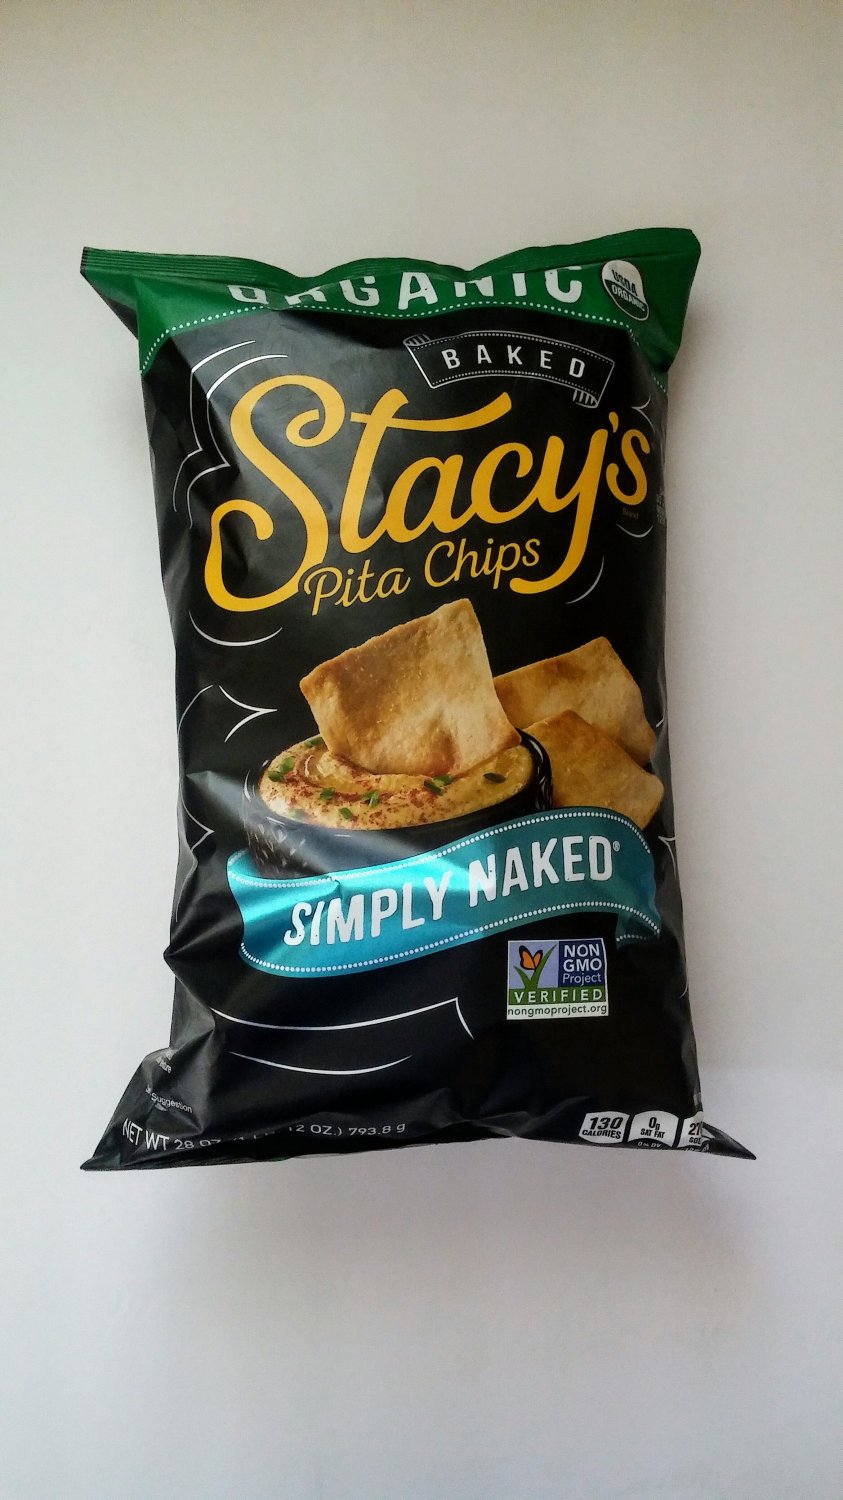 Stacys Pita Chips Perfectly Thymed Pita Crisps 675 oz Bags Pack of 8 * For more information 